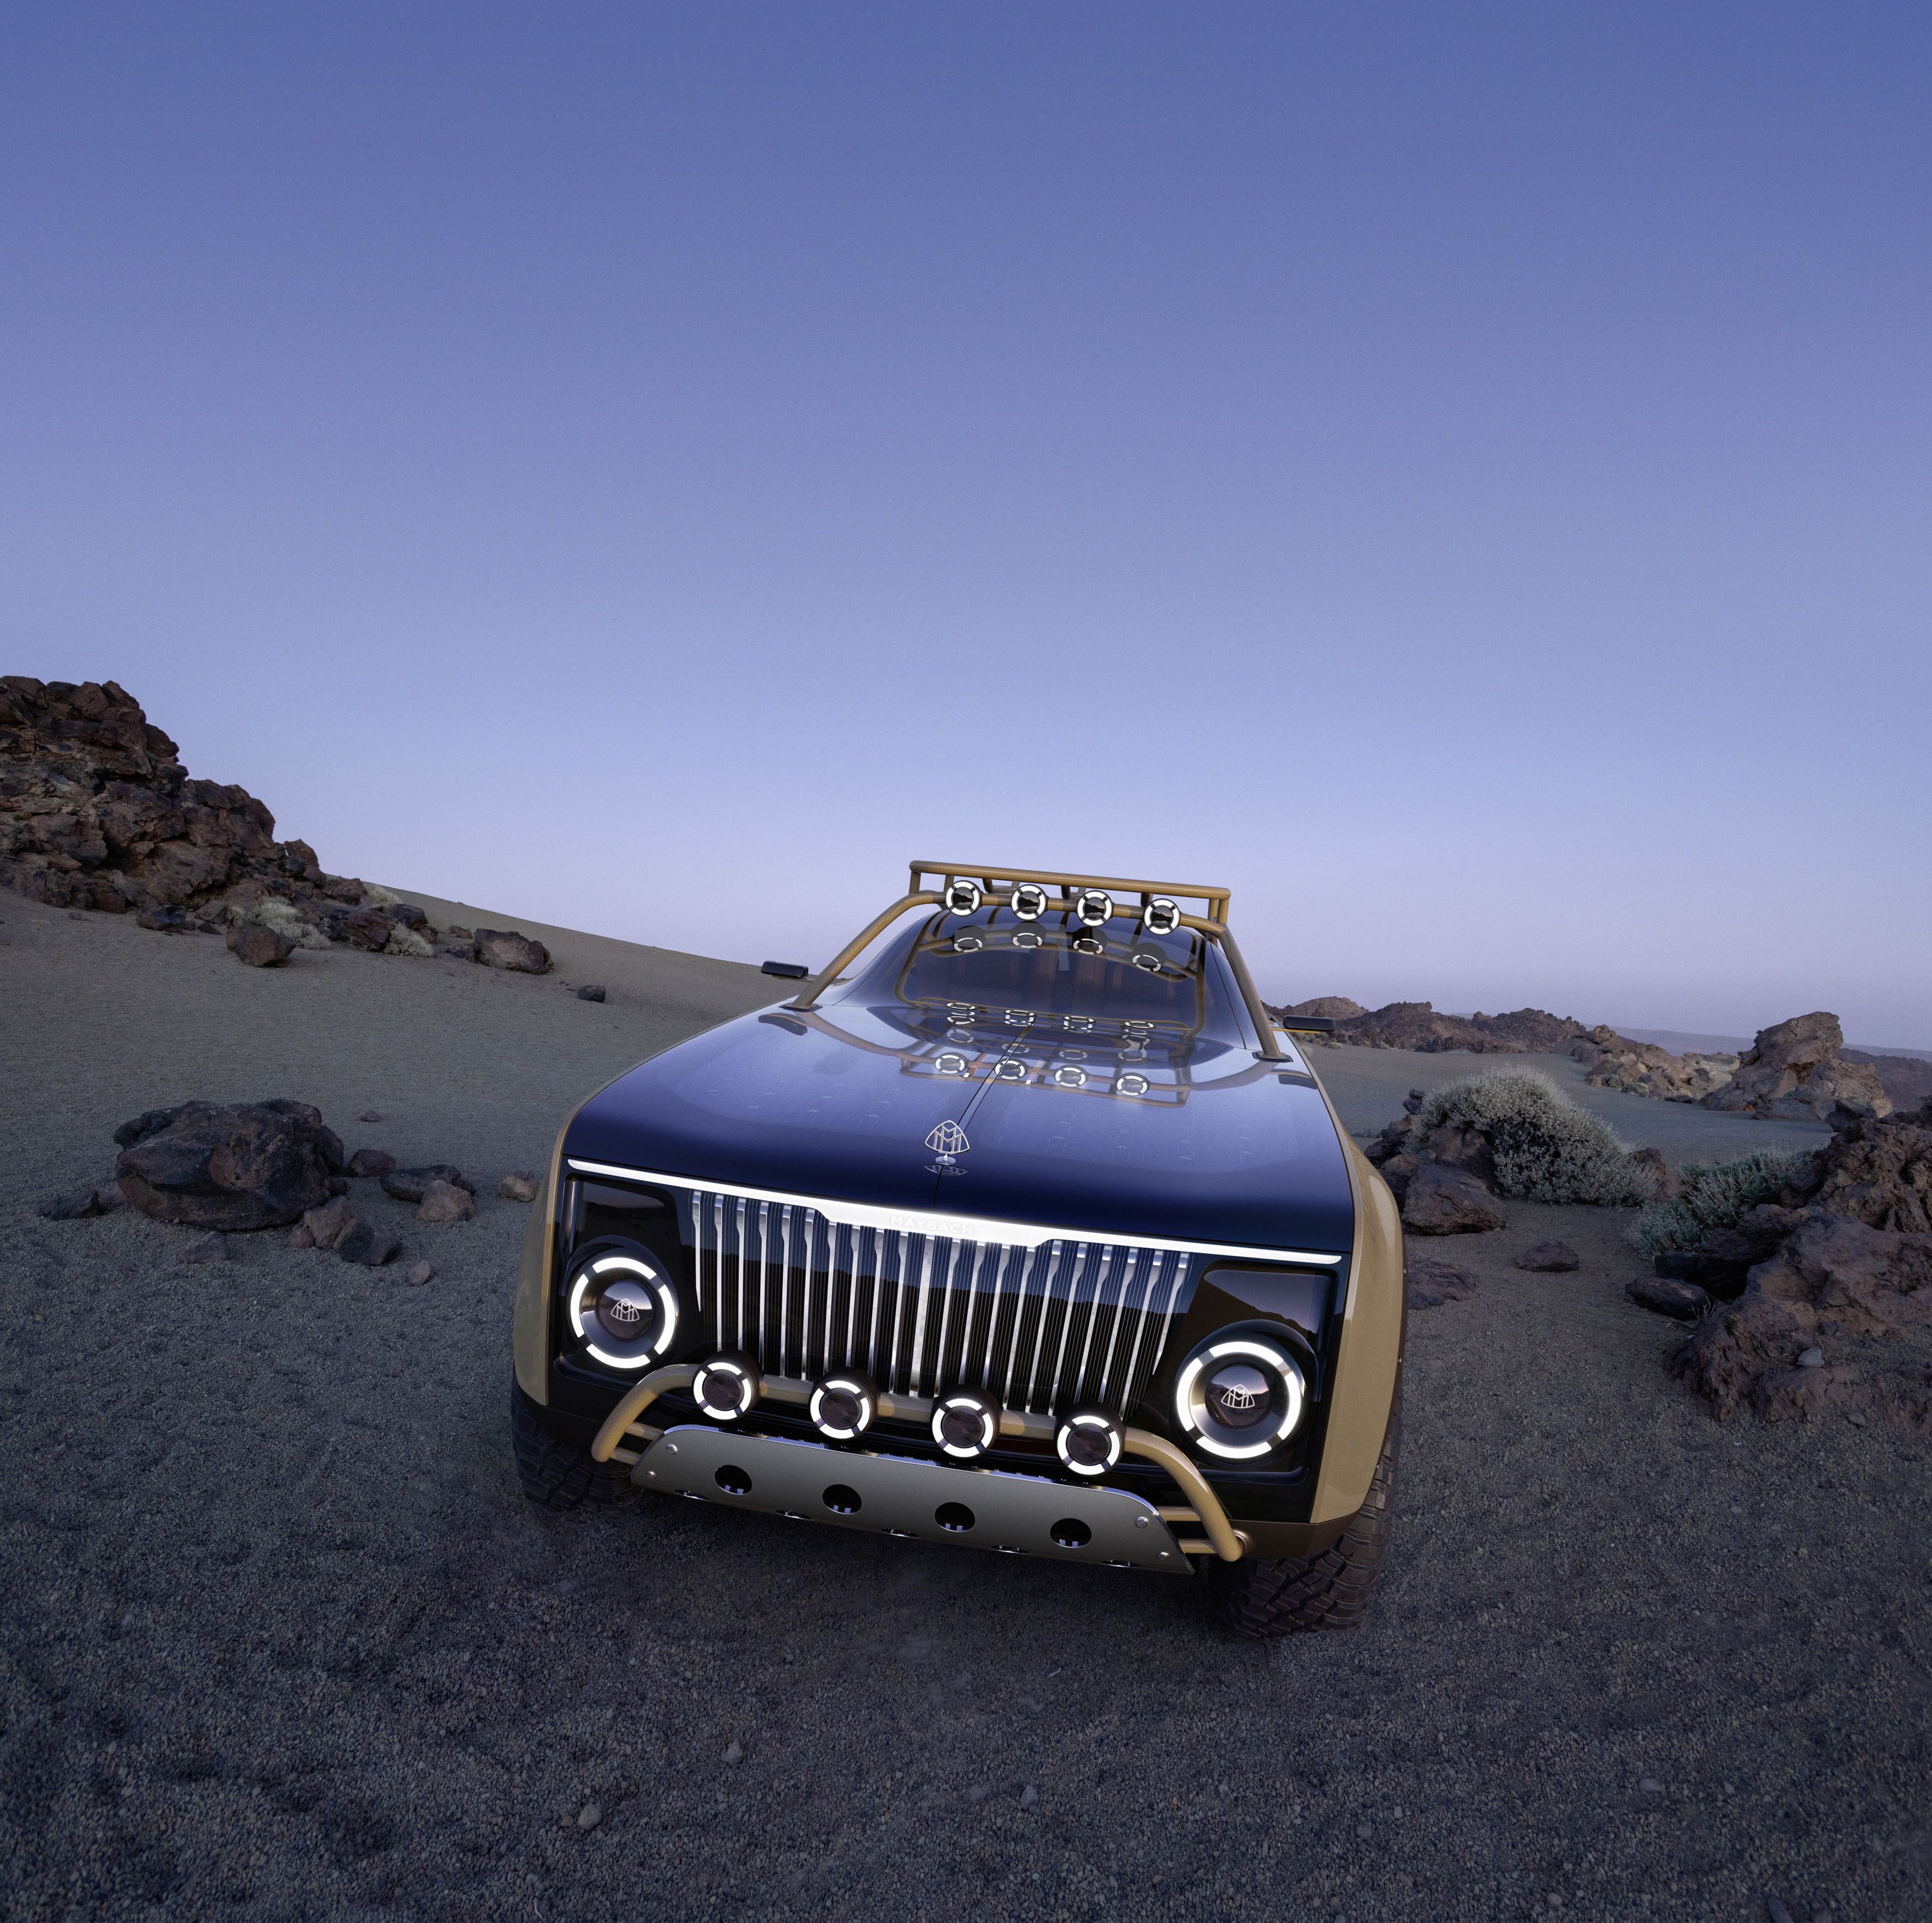 Project Maybach Is A High-Riding Luxury Off-Road Coupe Concept